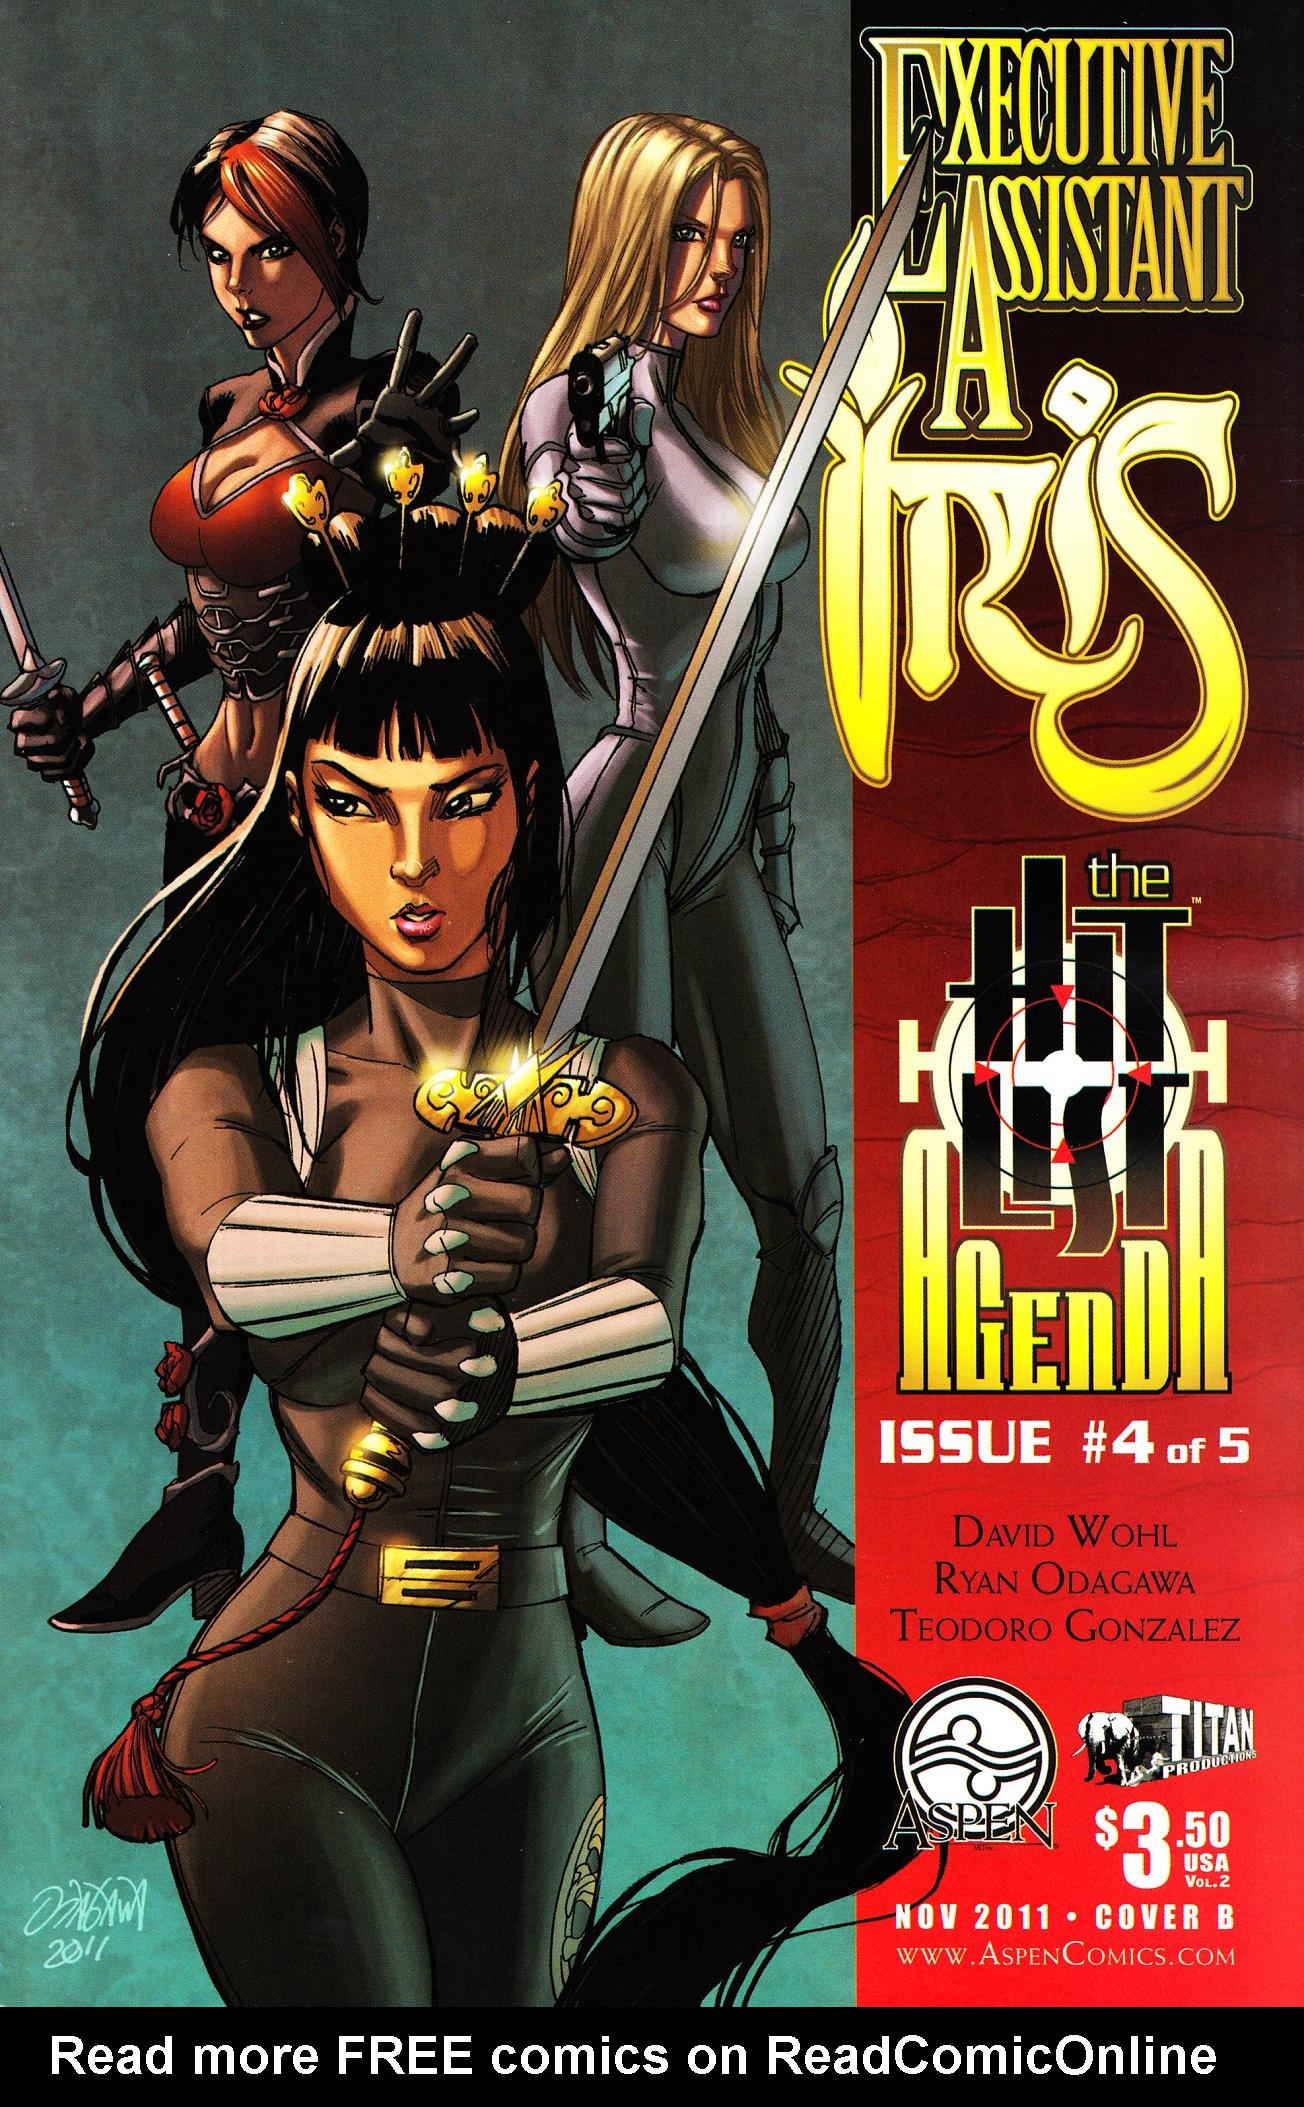 Read online Executive Assistant Iris (2011) comic -  Issue #4 - 2